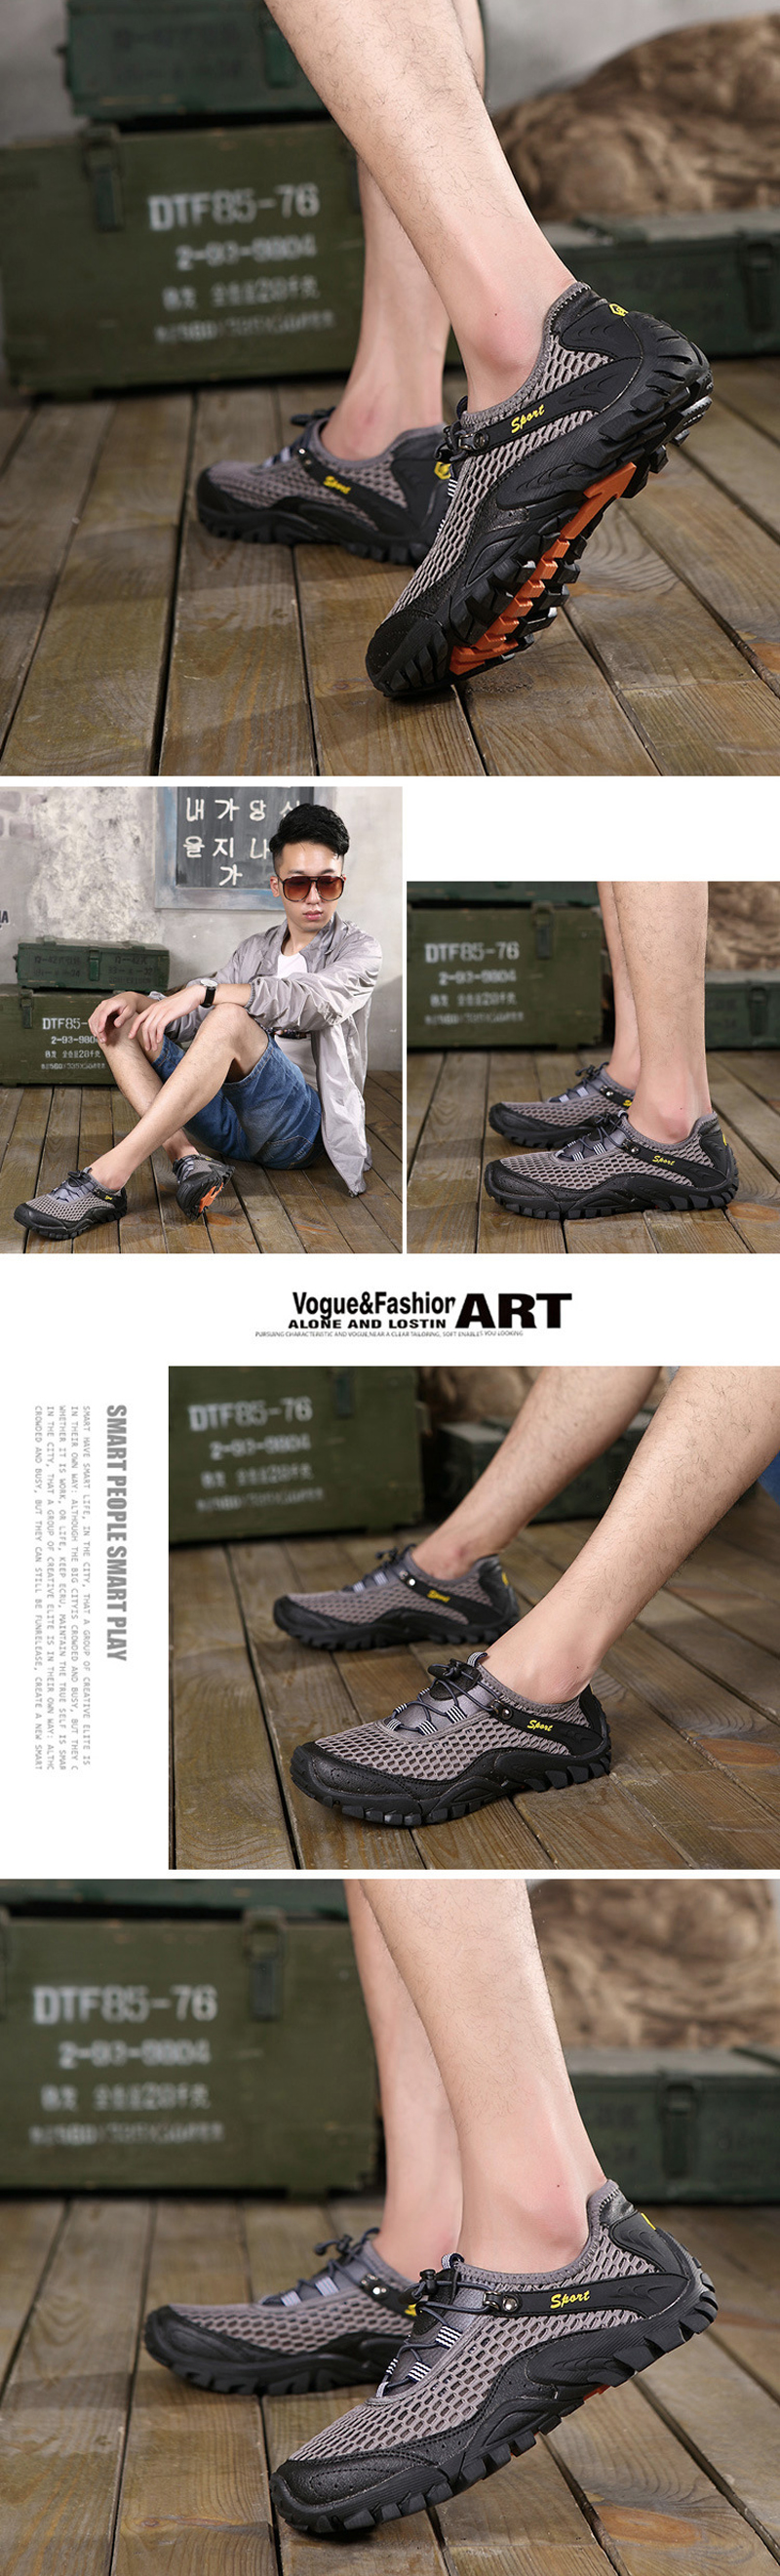 Q923-Men-Outdoor-Breathable-Summer-Trekking-Water-Shoes--Climbing-Hiking-Shoes-Sneakers-1323873